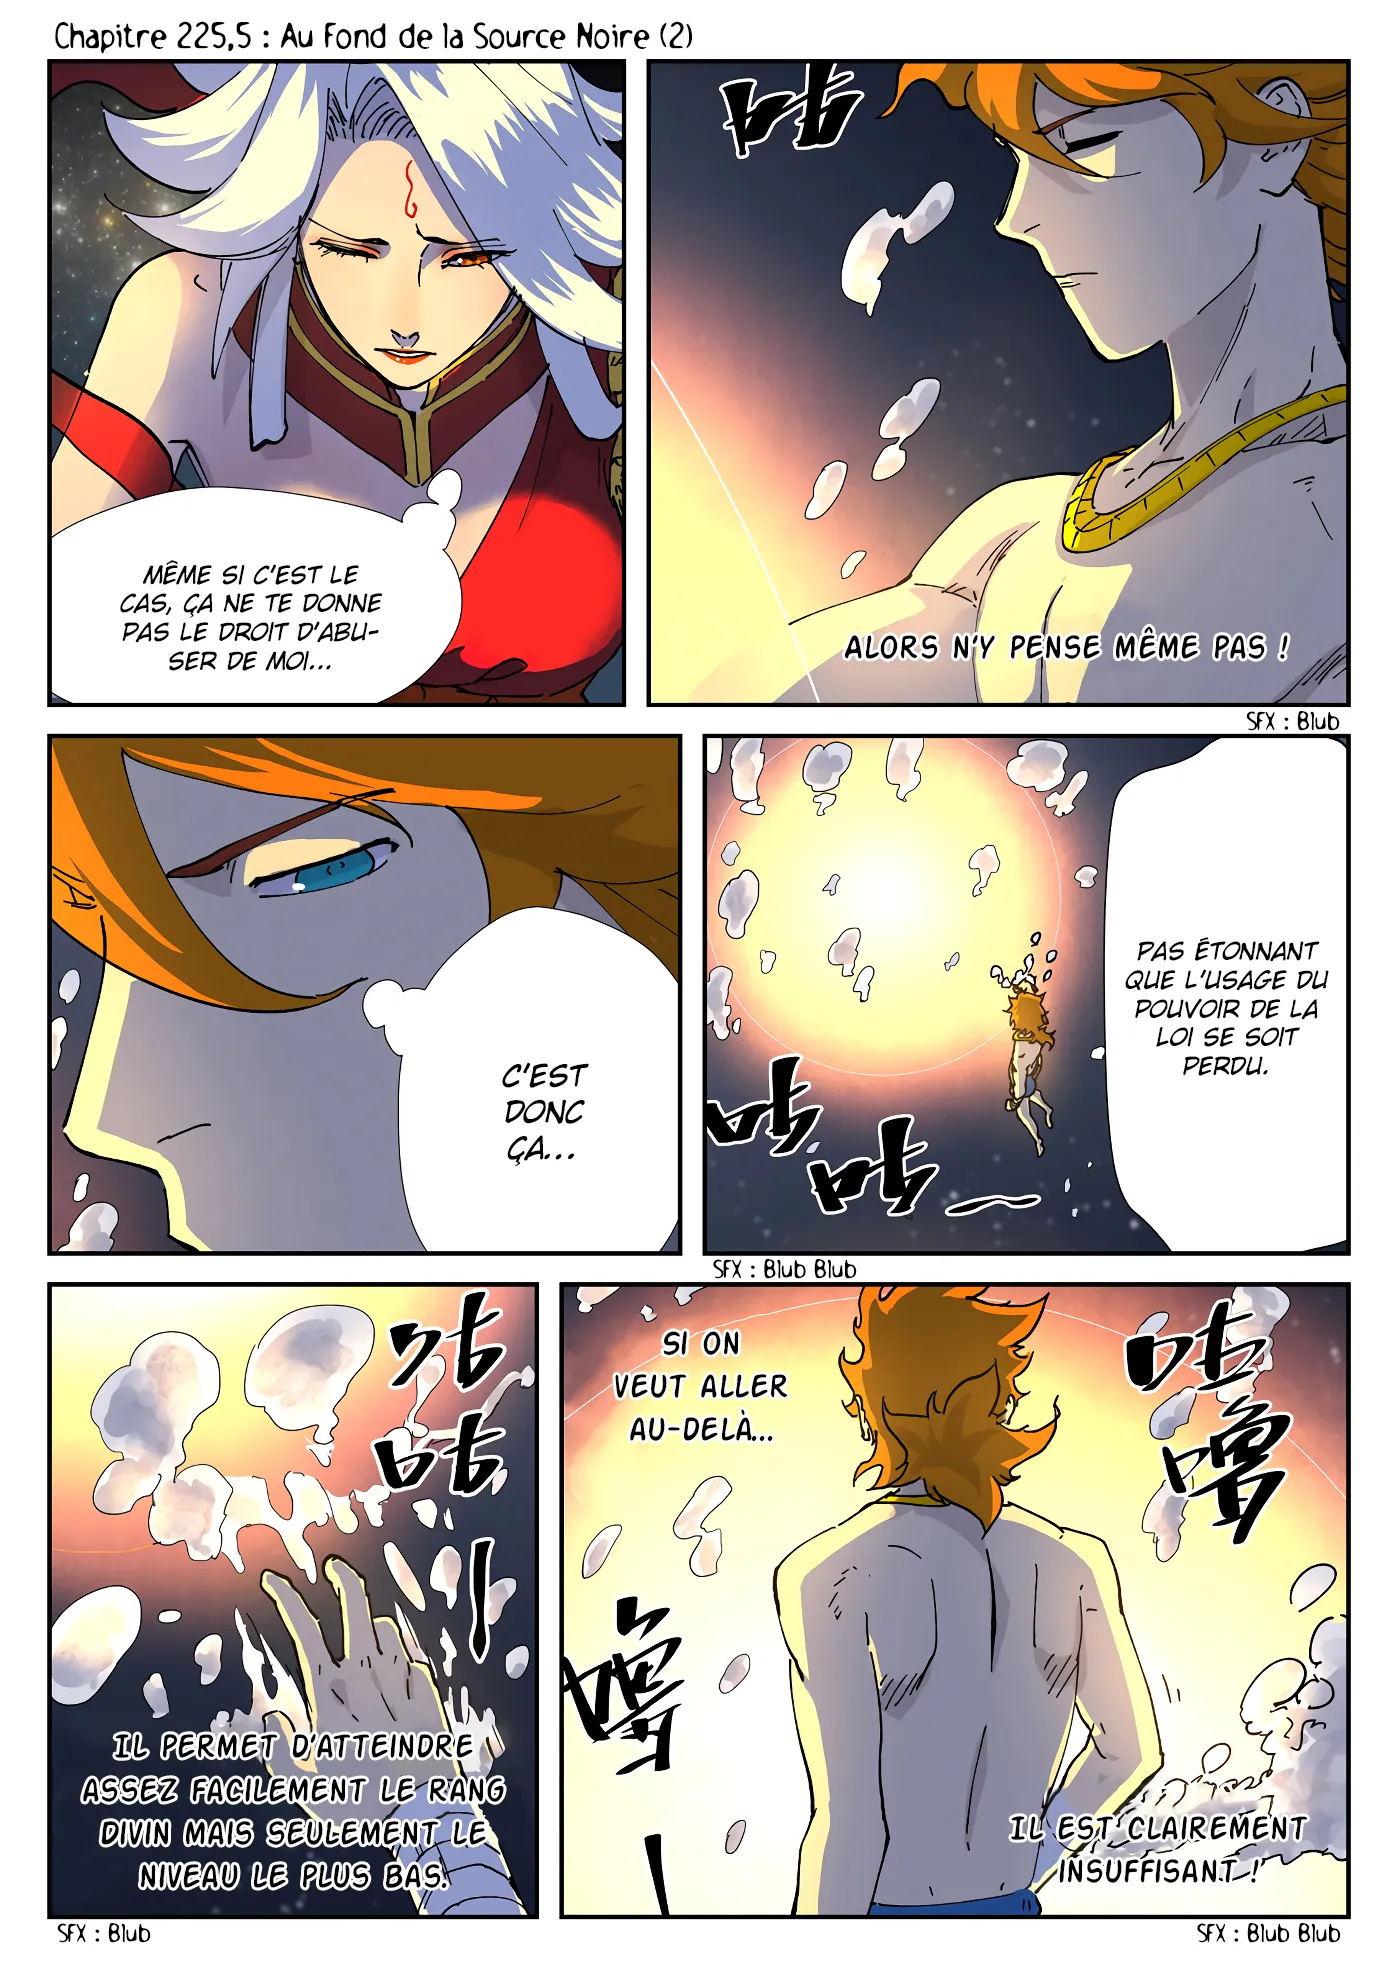 Tales Of Demons And Gods: Chapter chapitre-225.5 - Page 1